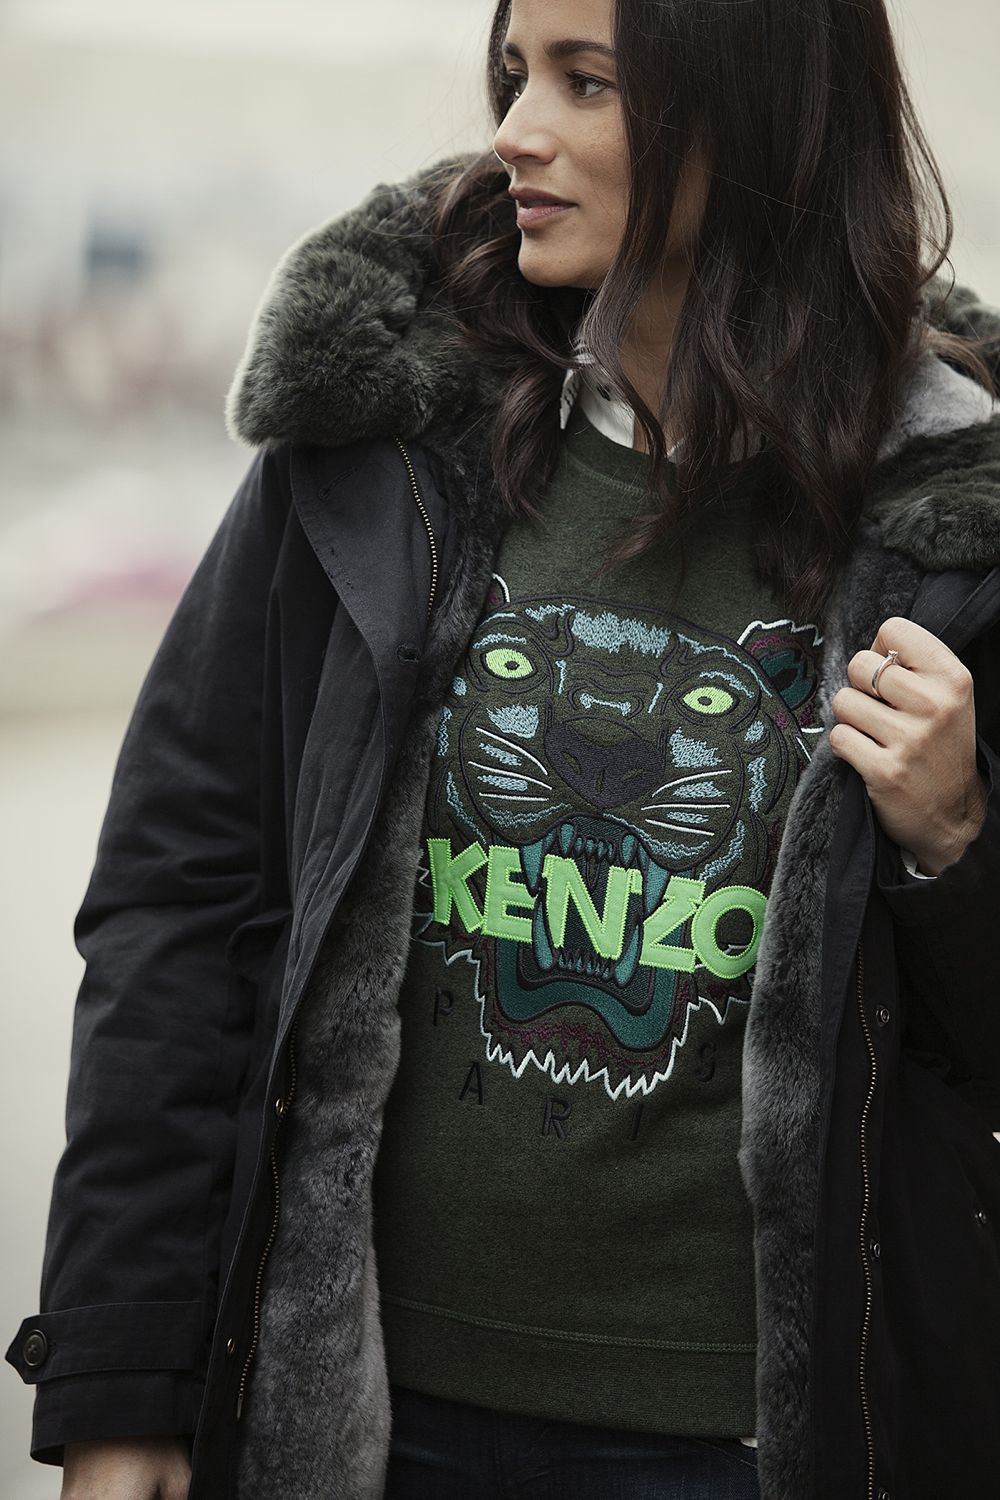 Streetstyle 2015 new fall wintercollection Kenzo sweater, Woolrich coat BlogForShops styling for Jimmy's Mode in Tilburg